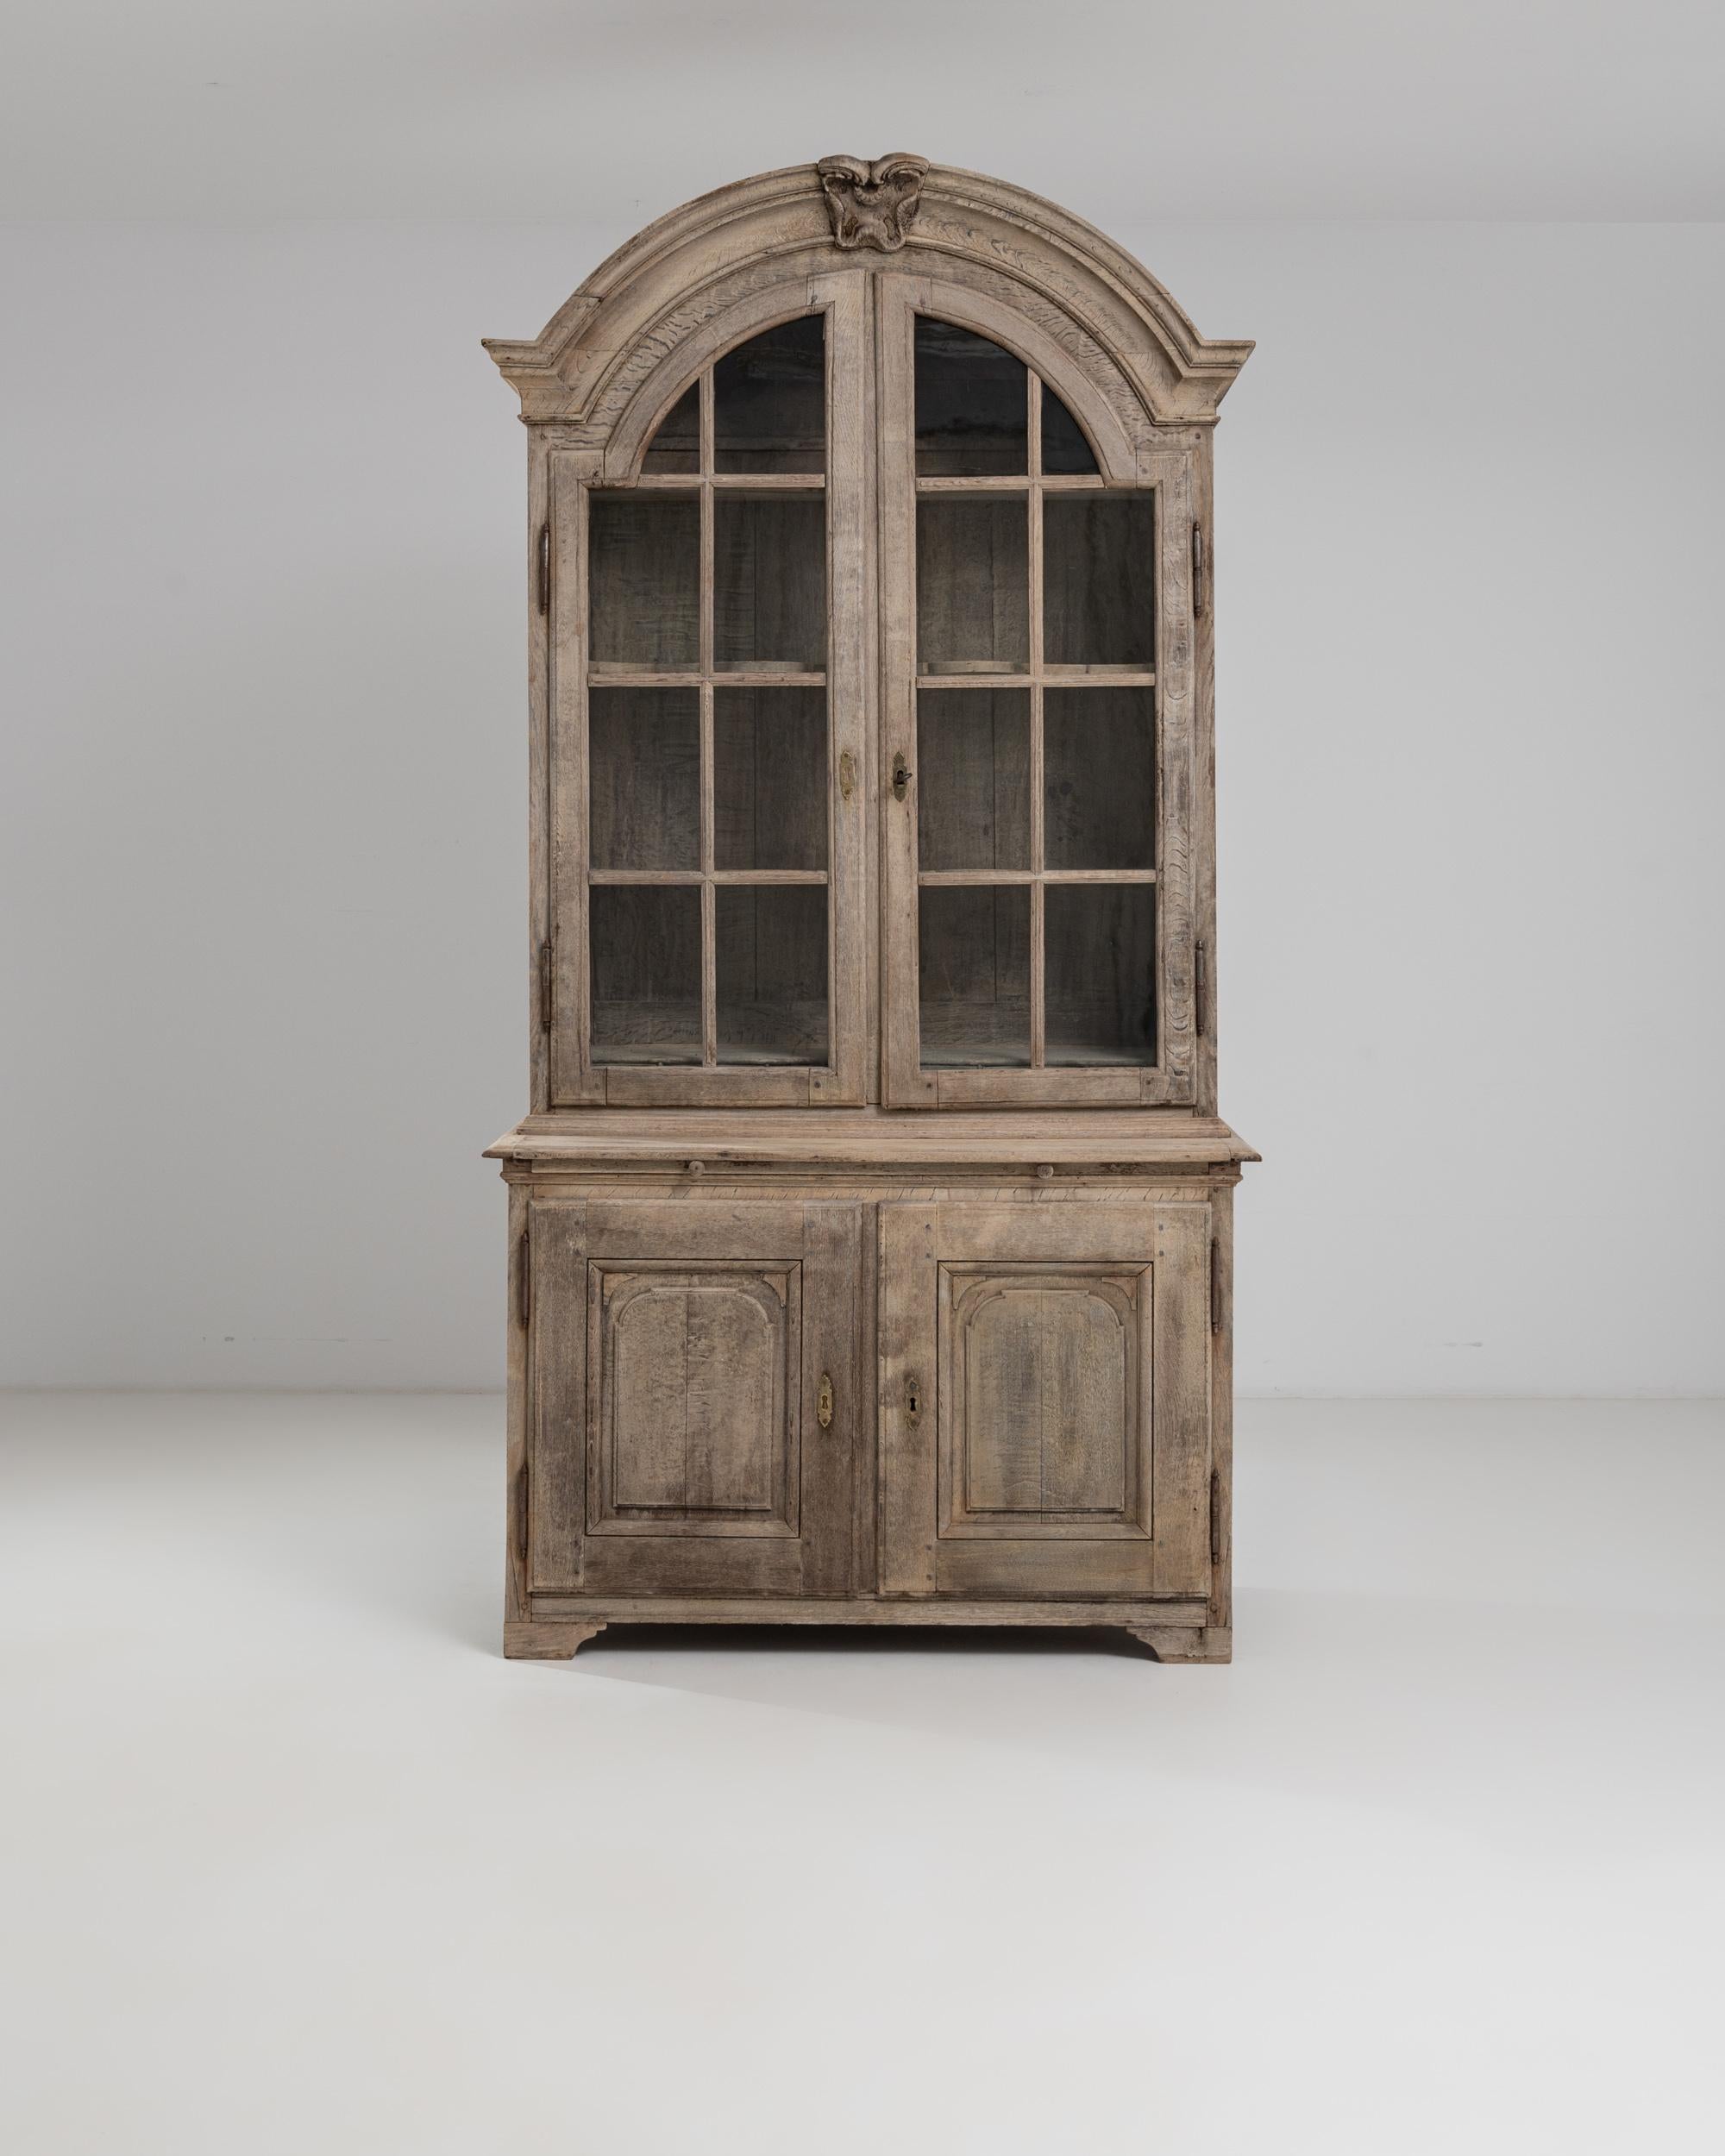 This delightful French provincial oak vitrine combines Neoclassical and rustic elements to elegant effect. Made in 19th Century France, the molded arch of the upper cabinet creates a grand architectural silhouette; mullioned windows open out onto